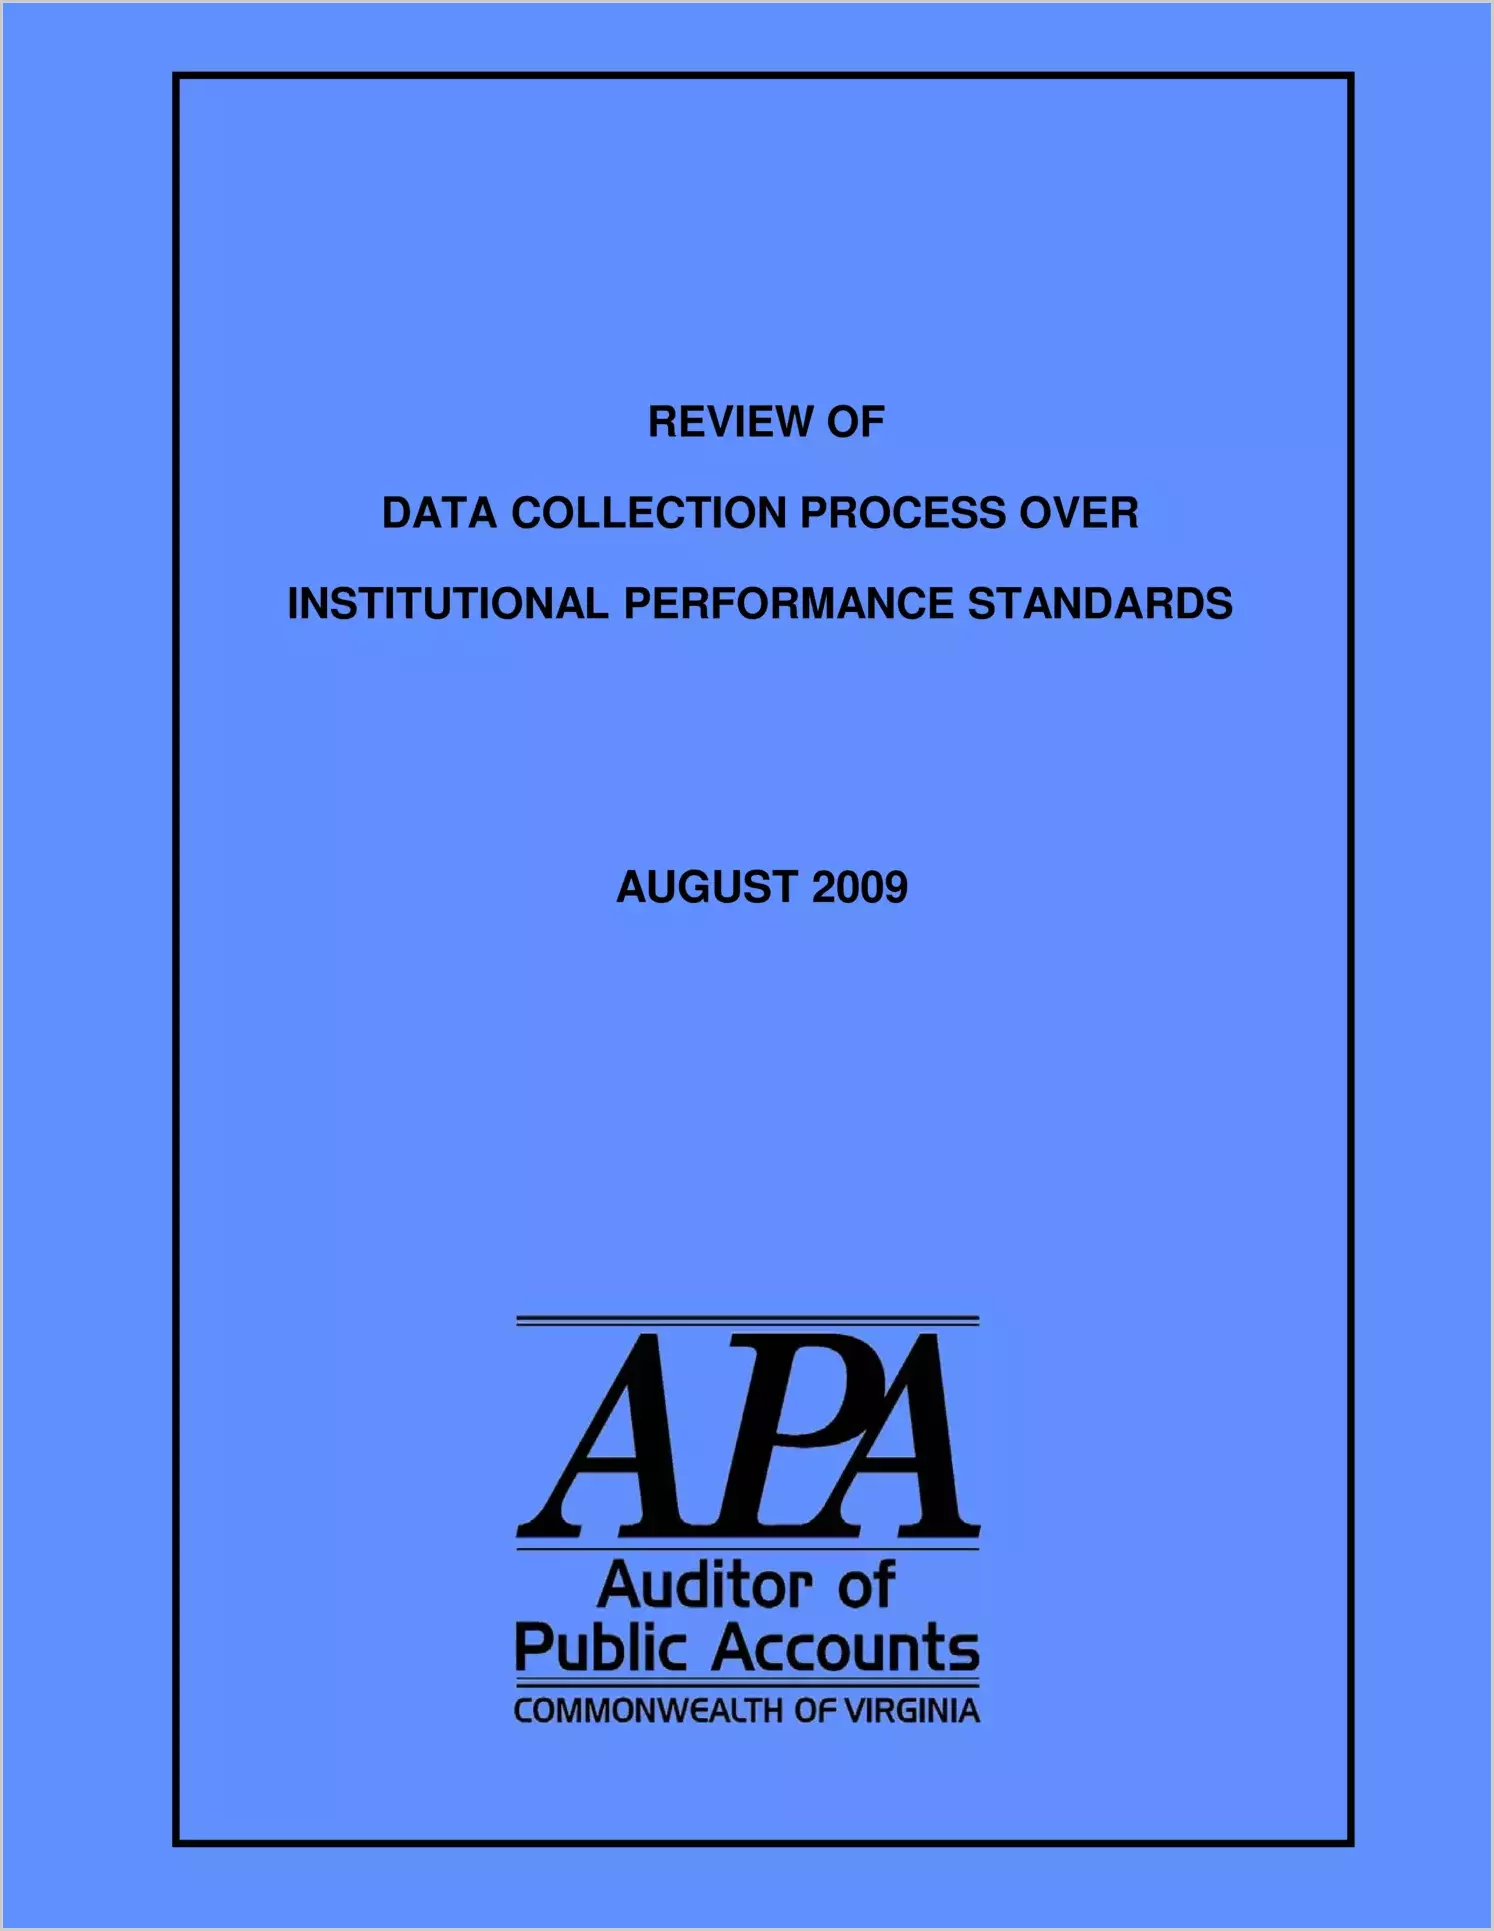 Review of Data Collection Process over Institutional Performance Standards - August 2009.